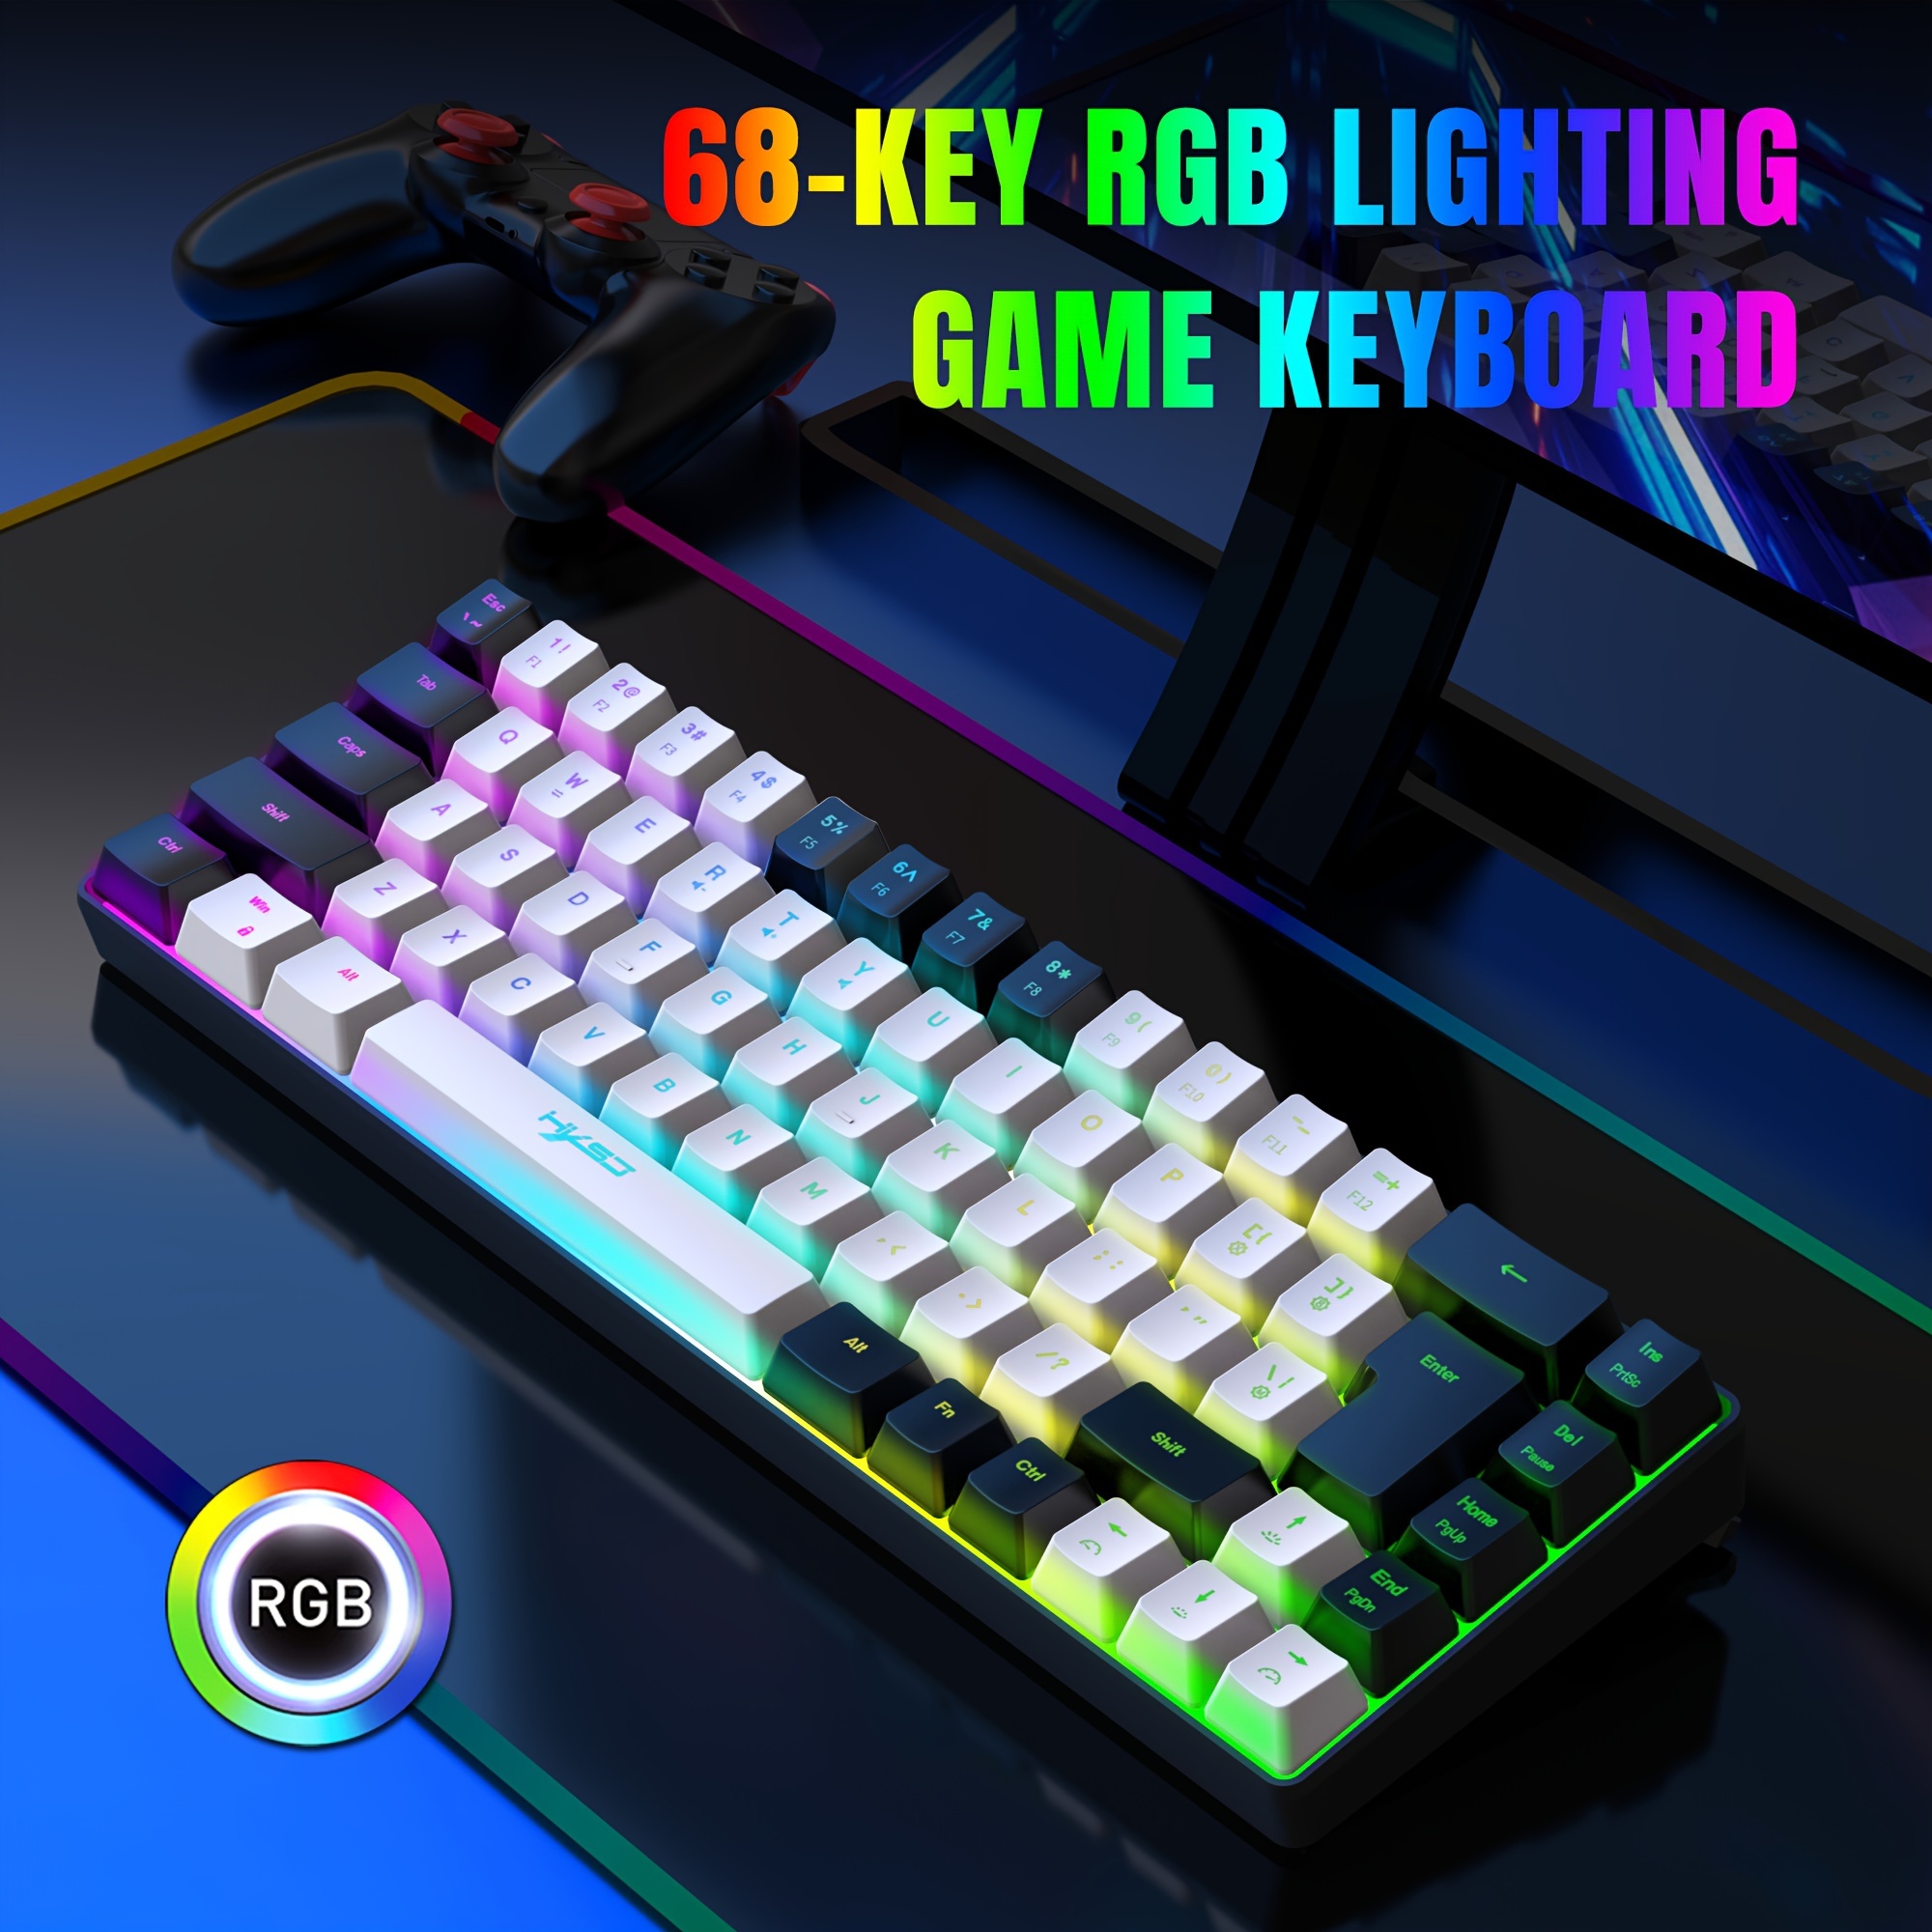 

68-key Gaming Keyboard - 60% Compact Rgb Backlit Wired Keyboard, Waterproof, Compact & Portable, Perfect For Pc/mac Gamers & Business Trips